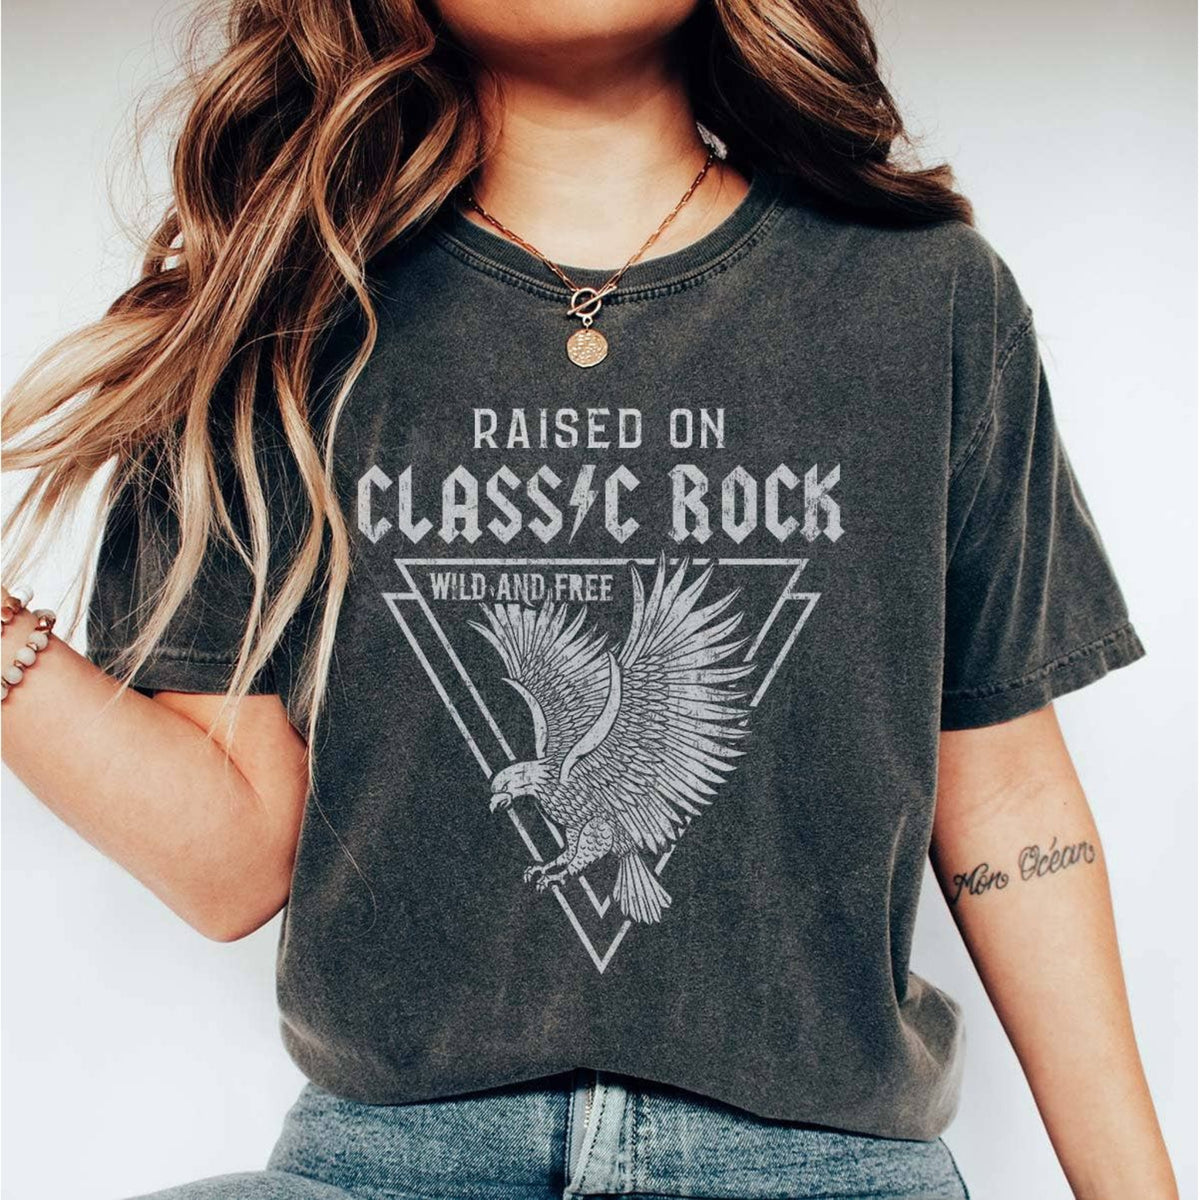 Grey "Raised on Classic Rock" t-shirt - womens graphic tees 